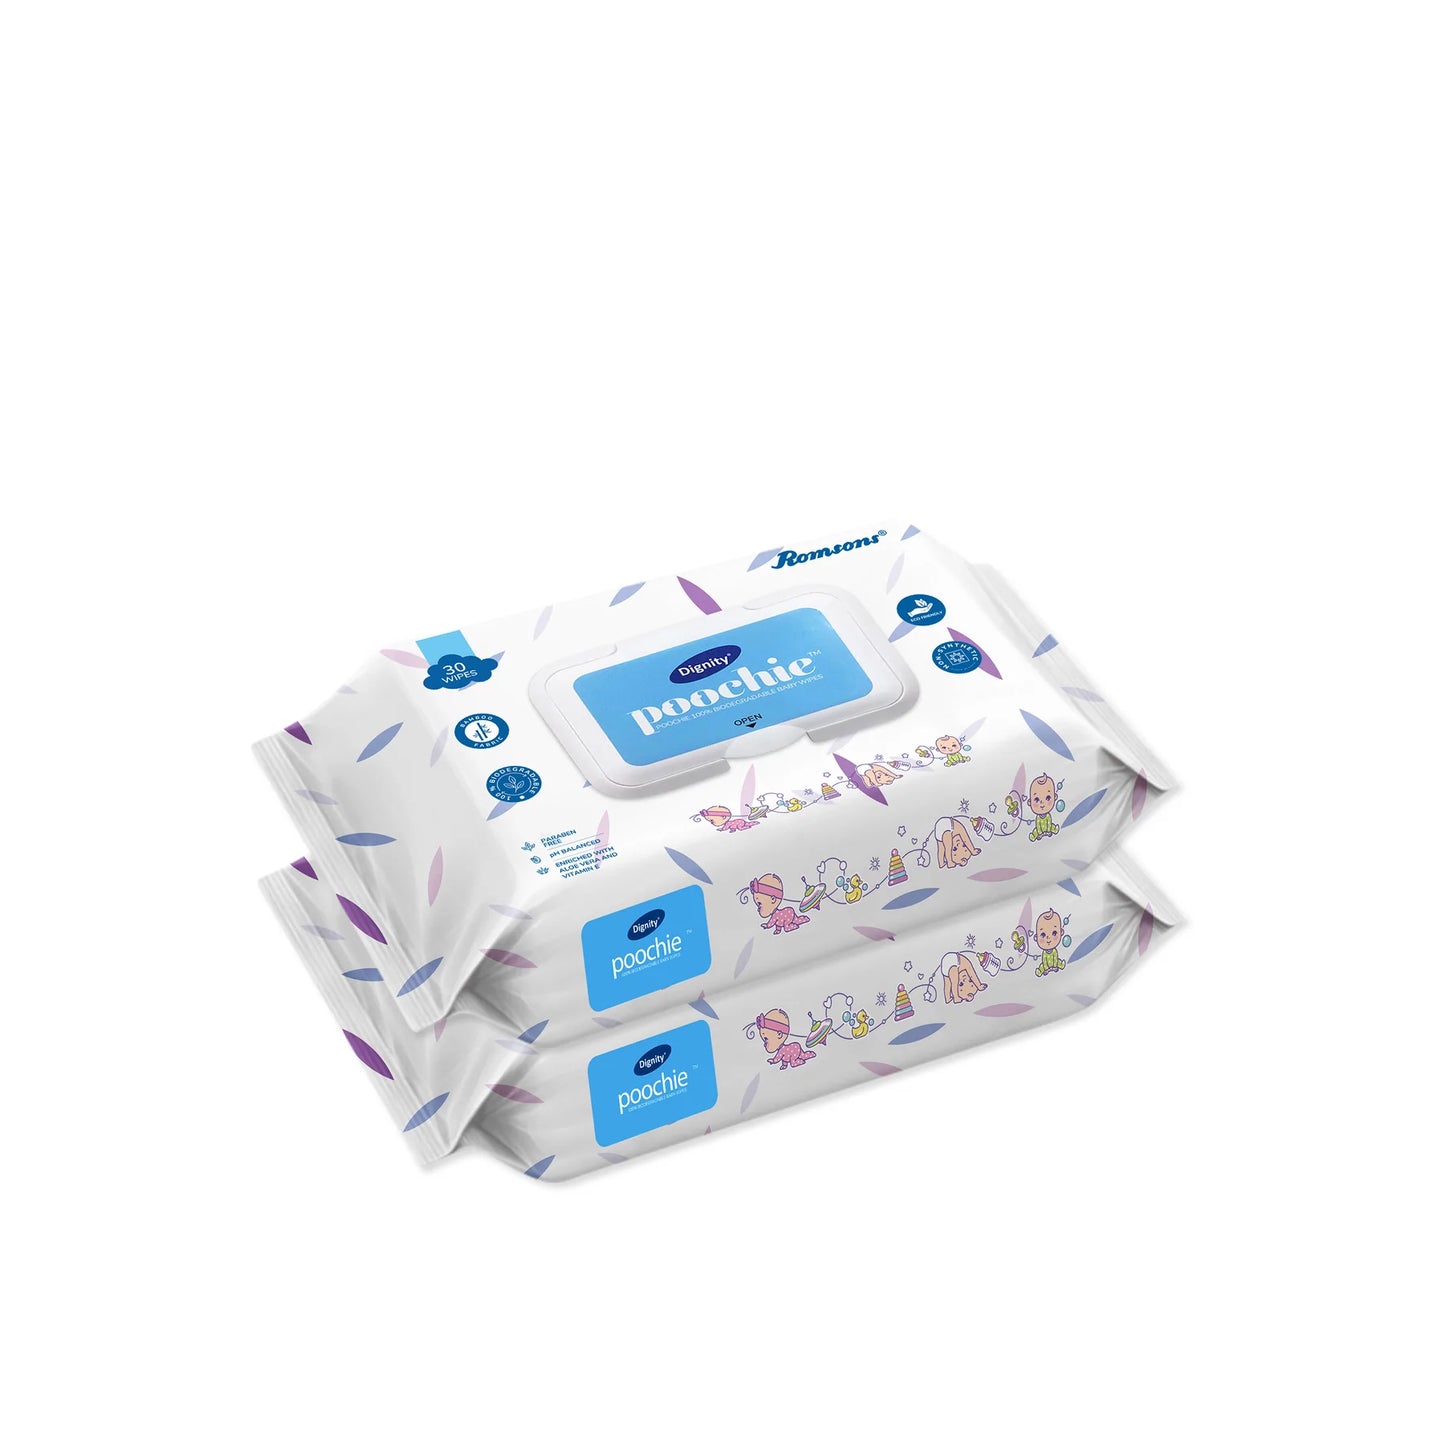 Dignity Poochie 100% Biodegradable Baby Wipes (80 Wipes/Pack)